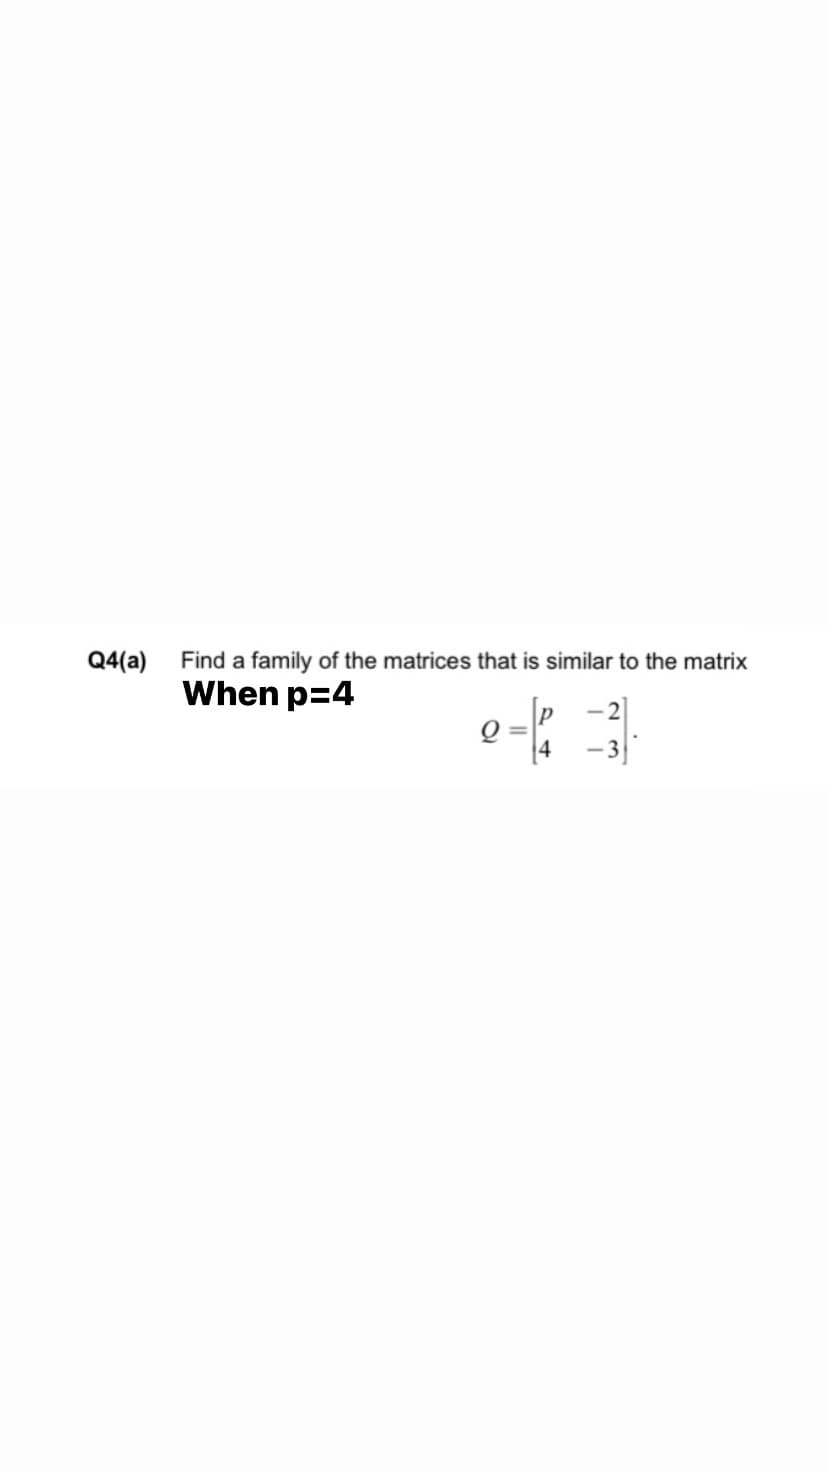 Q4(a)
Find a family of the matrices that is similar to the matrix
When p=4
